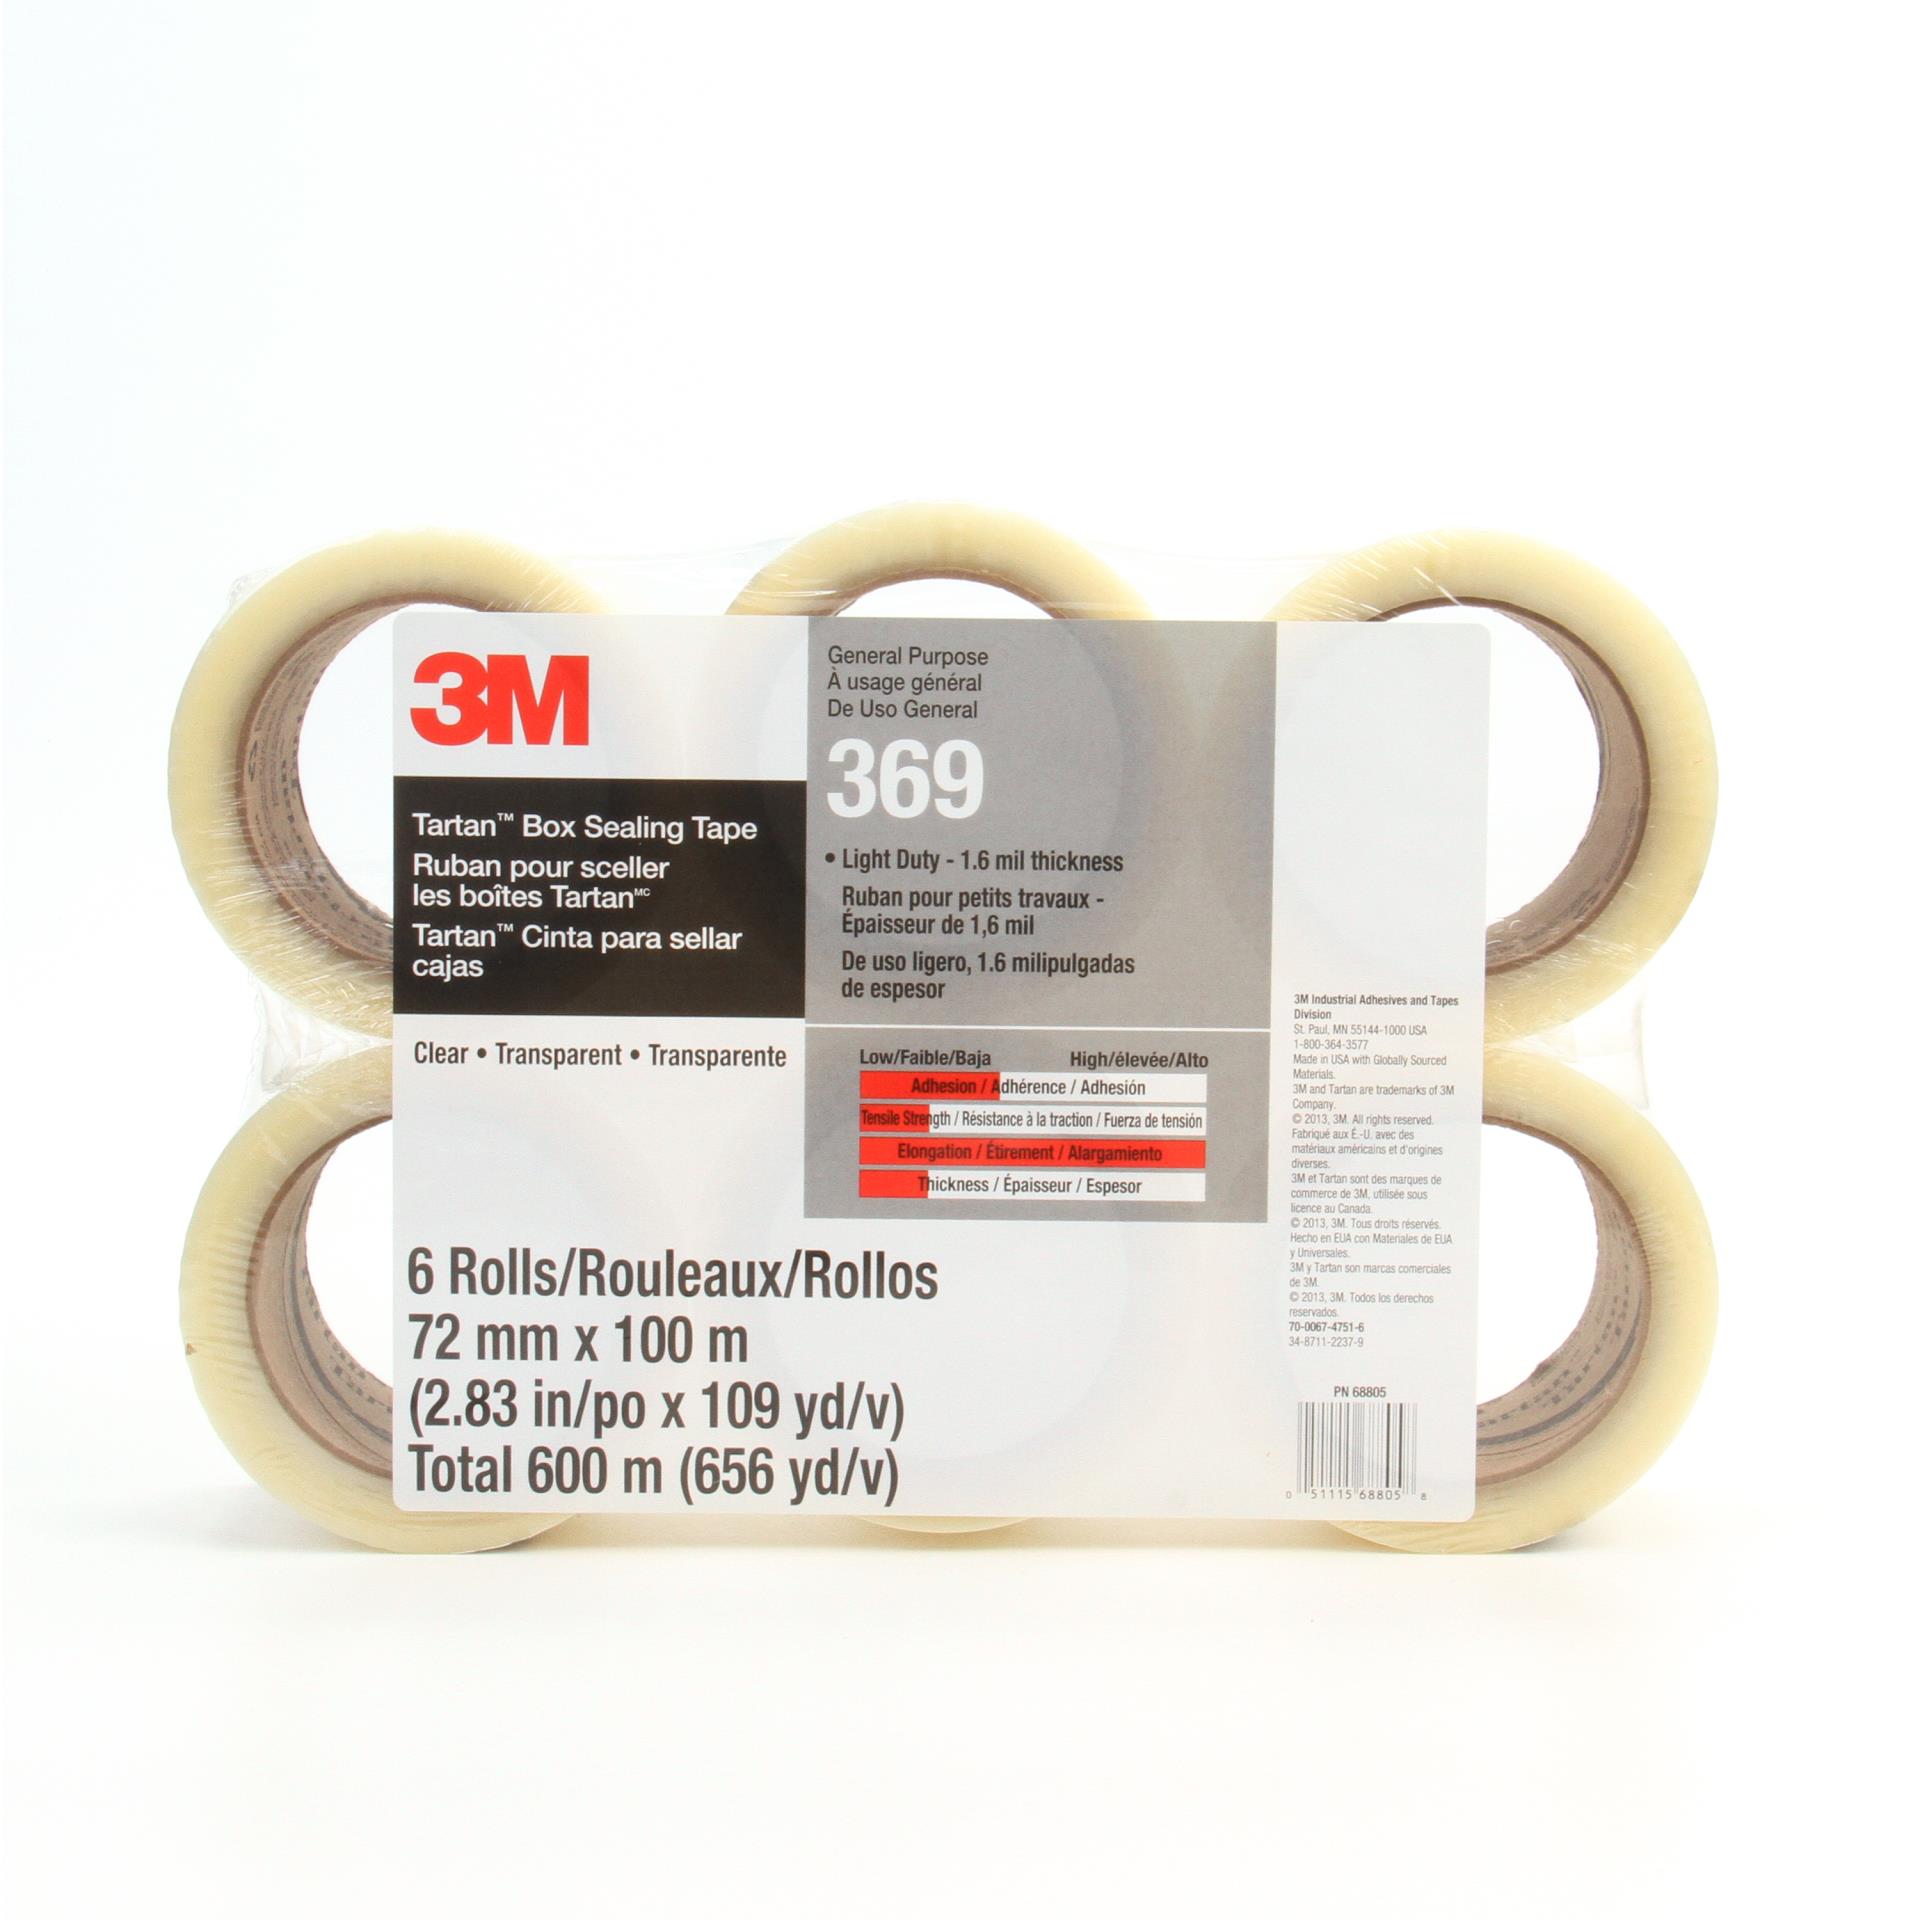 1 Roll Stop Marking Tape check contents Shipping Packing 2.0 mil 330' 